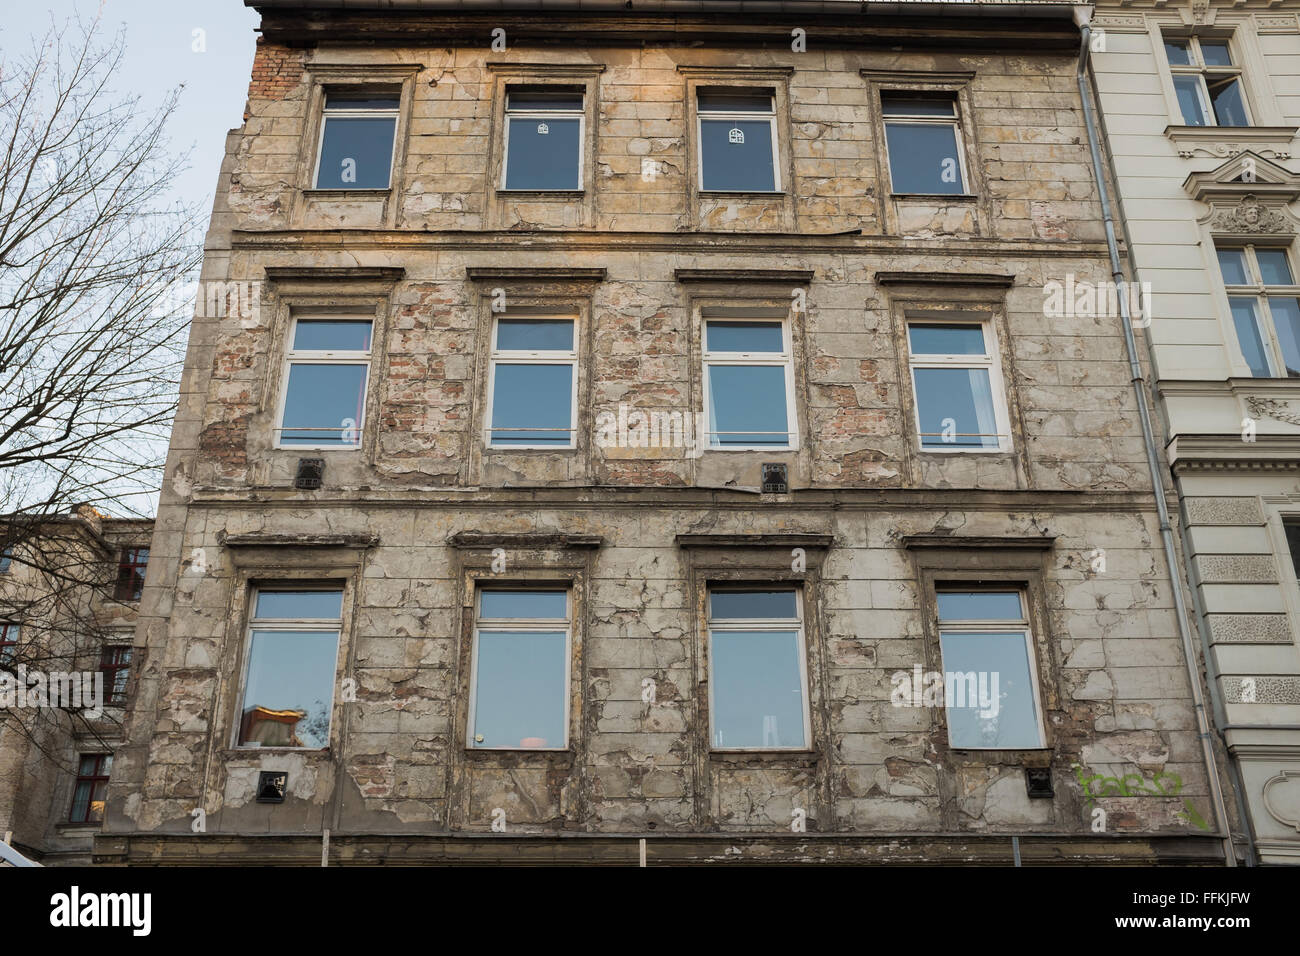 BERLIN, 28 JANUARY: Building facade not restored in the Auguststrasse in Berlin Mitte on 28 January, 2016. Stock Photo